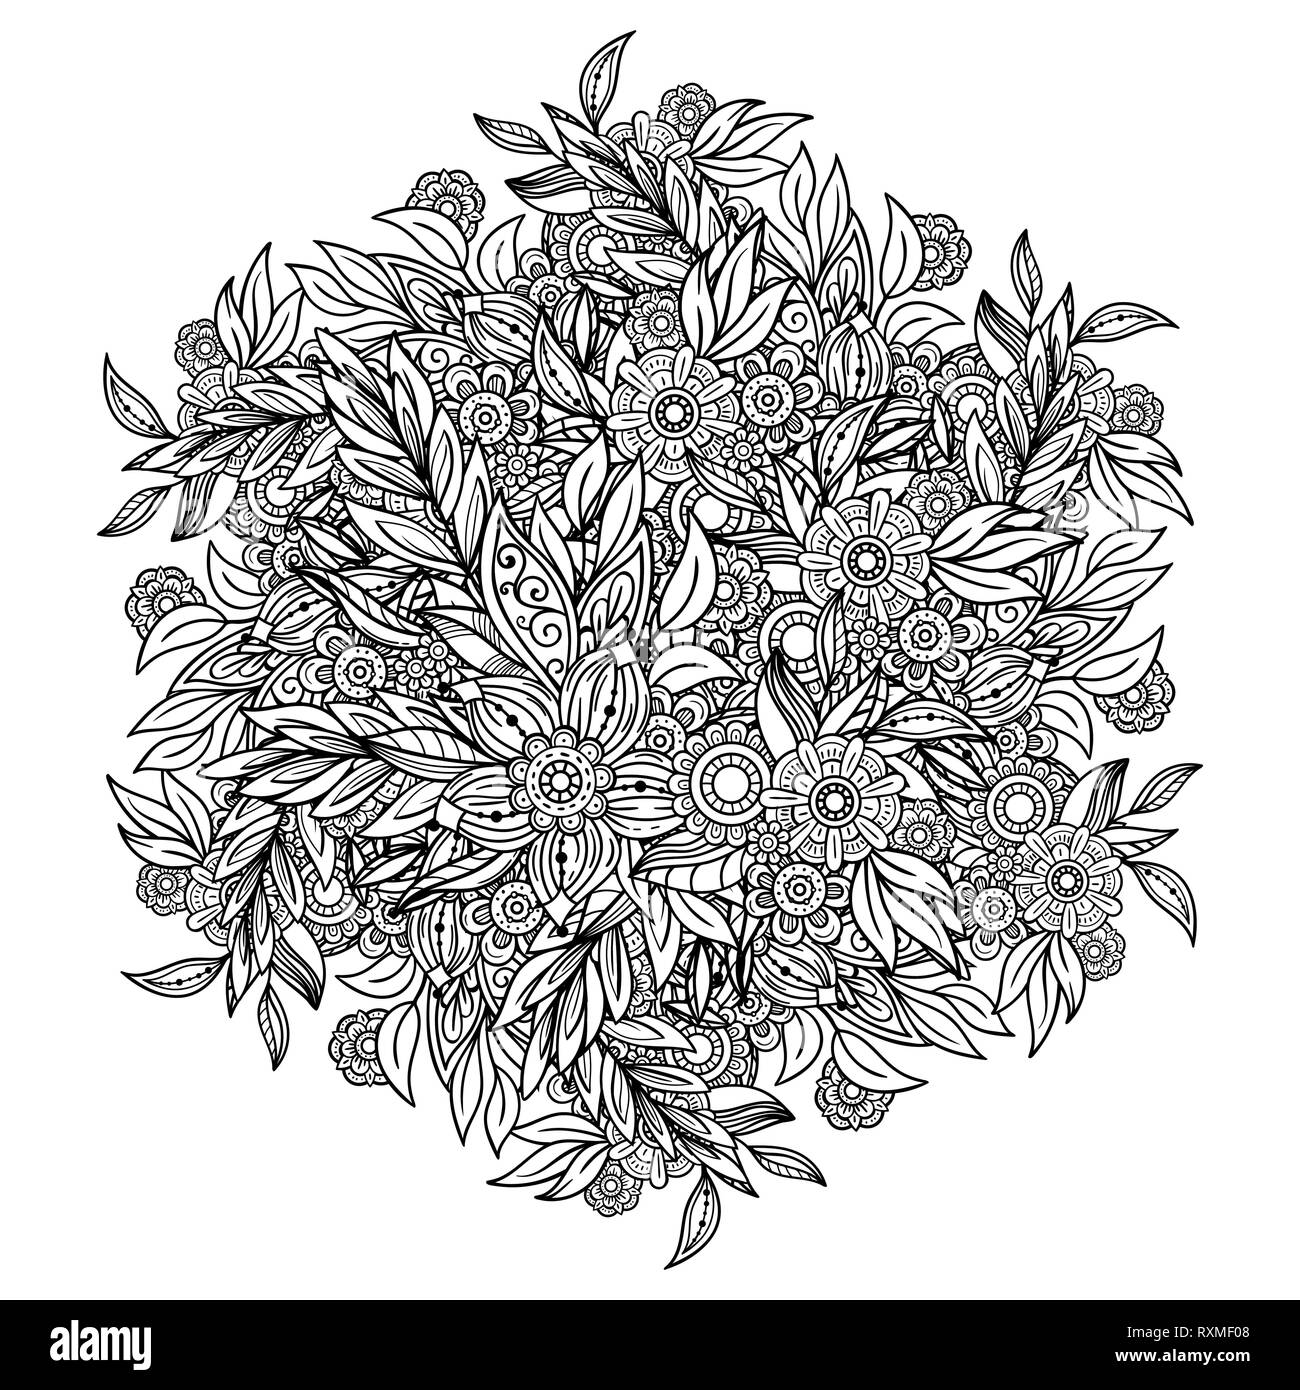 Adult coloring page with flowers pattern. Black and white doodle wreath ...